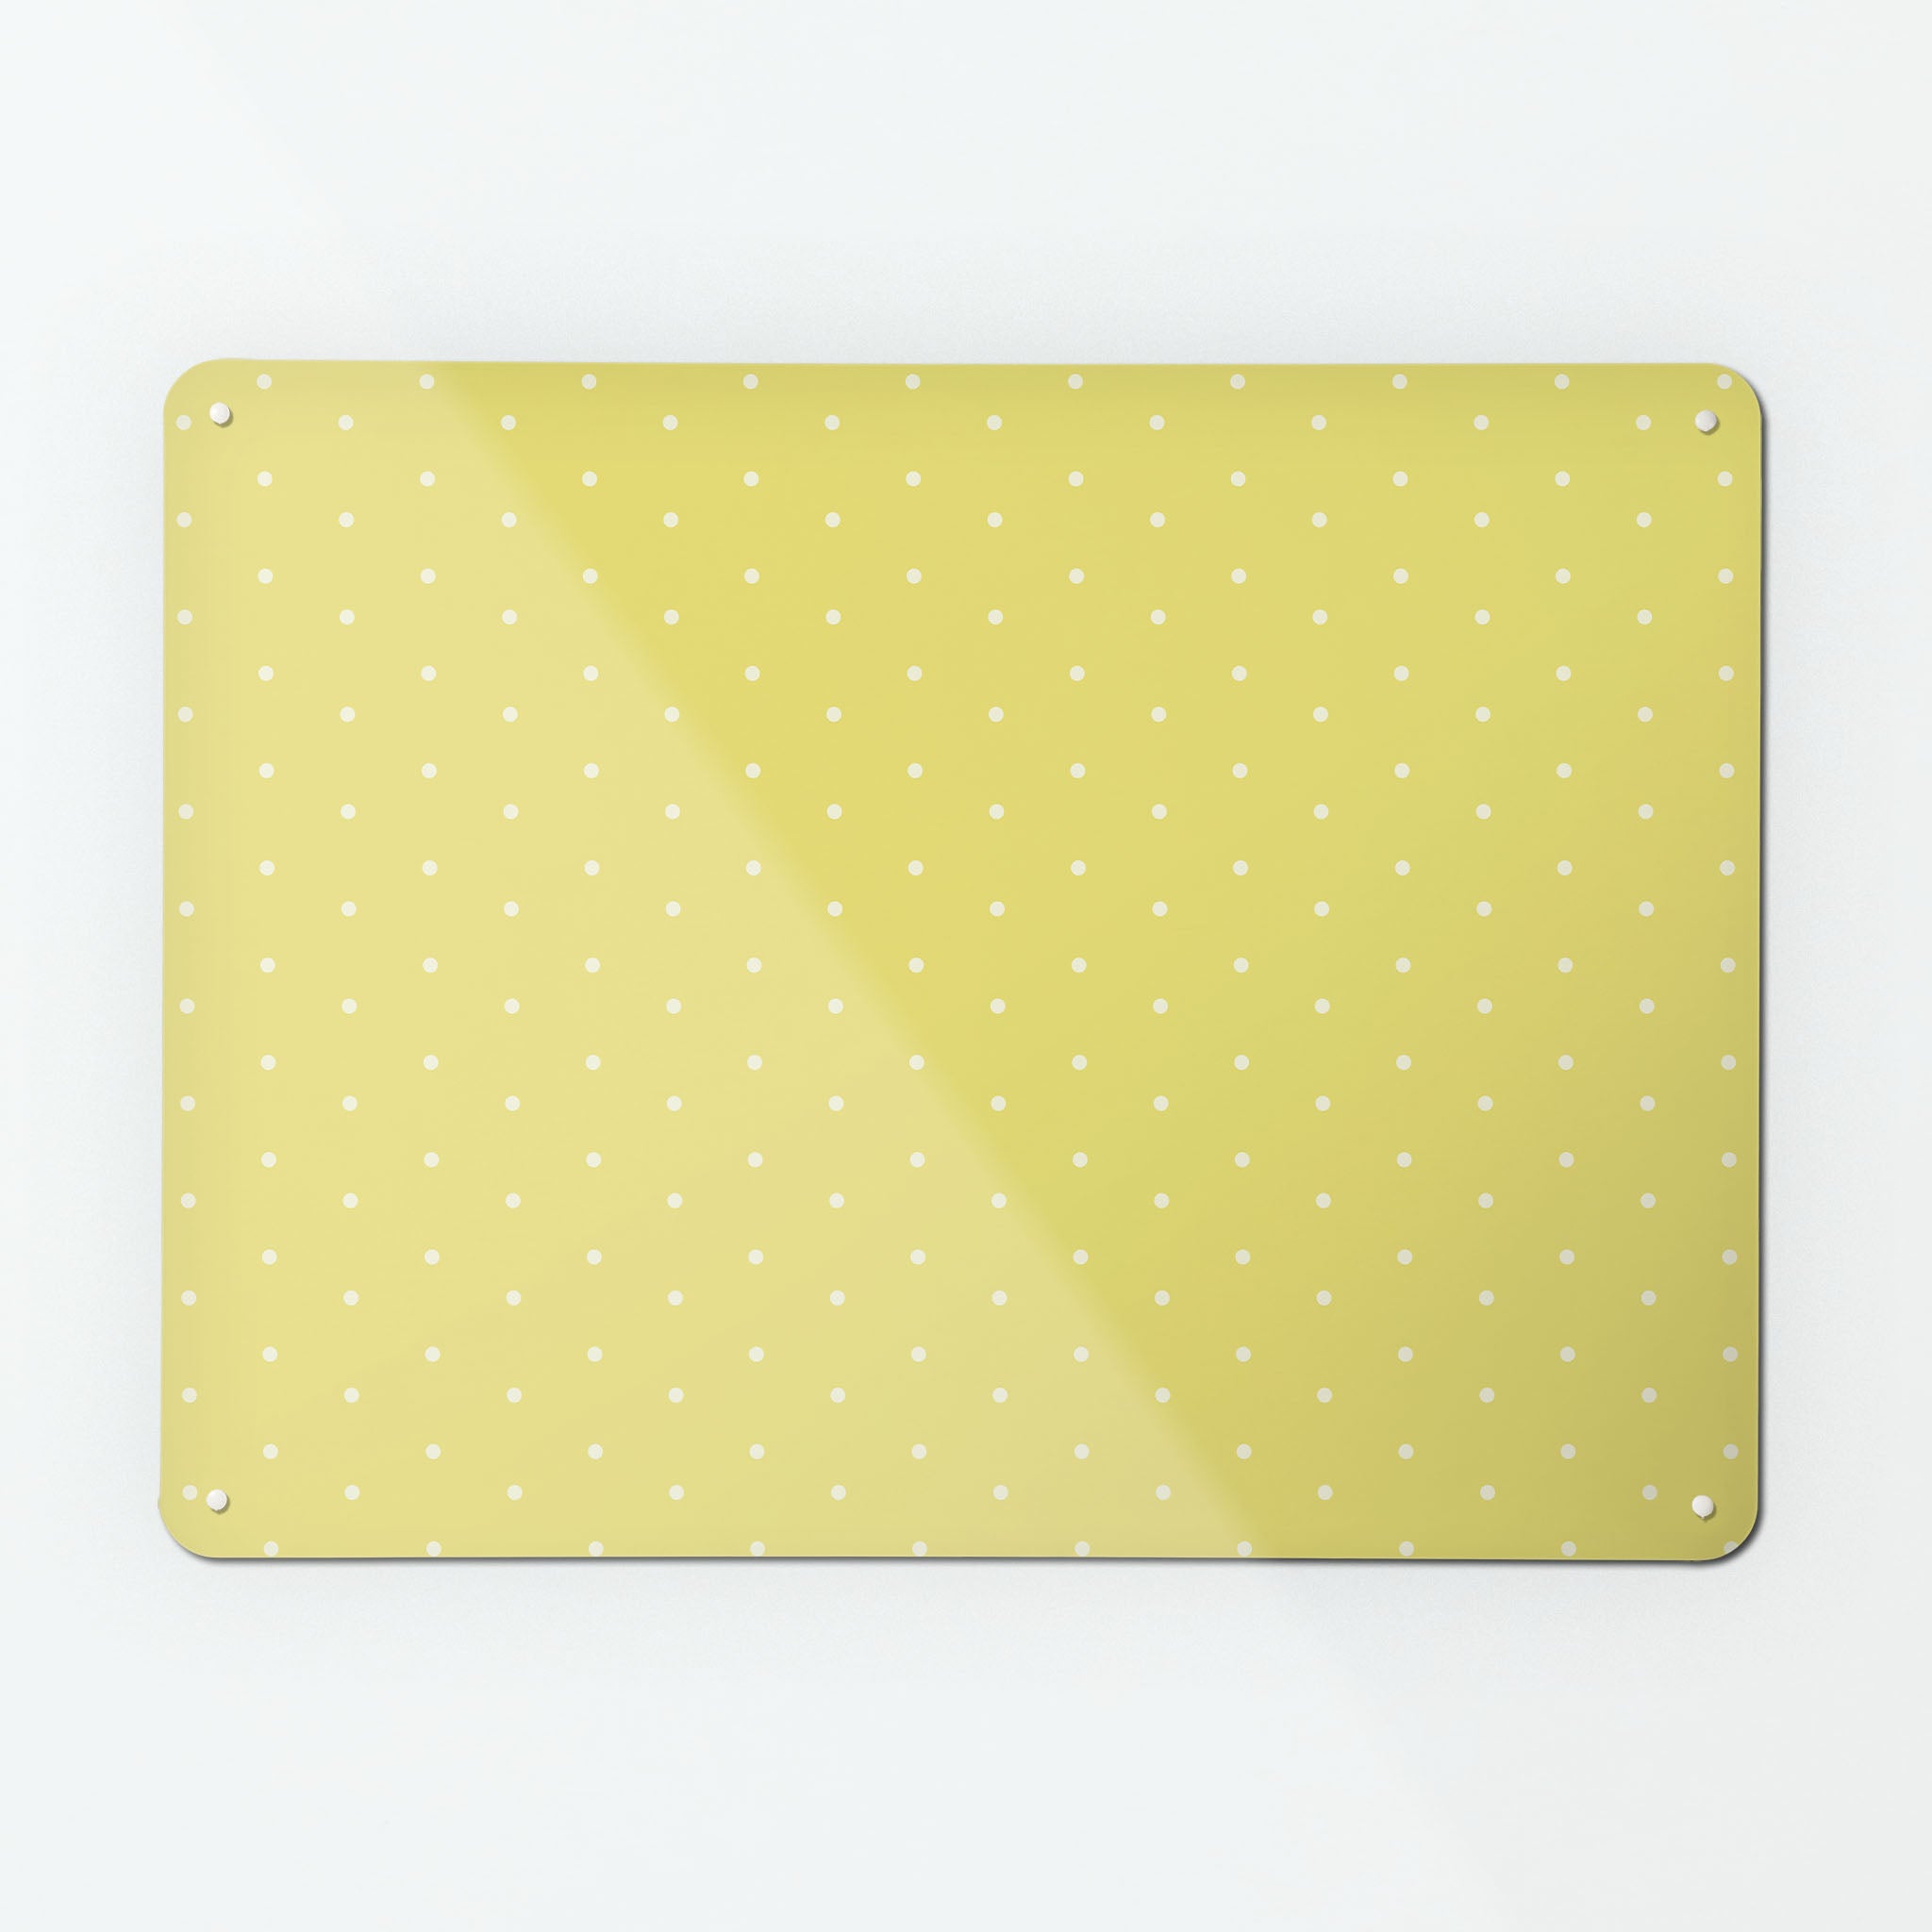 A large magnetic notice board by Beyond the Fridge with a white polkadots on a yellow background pattern